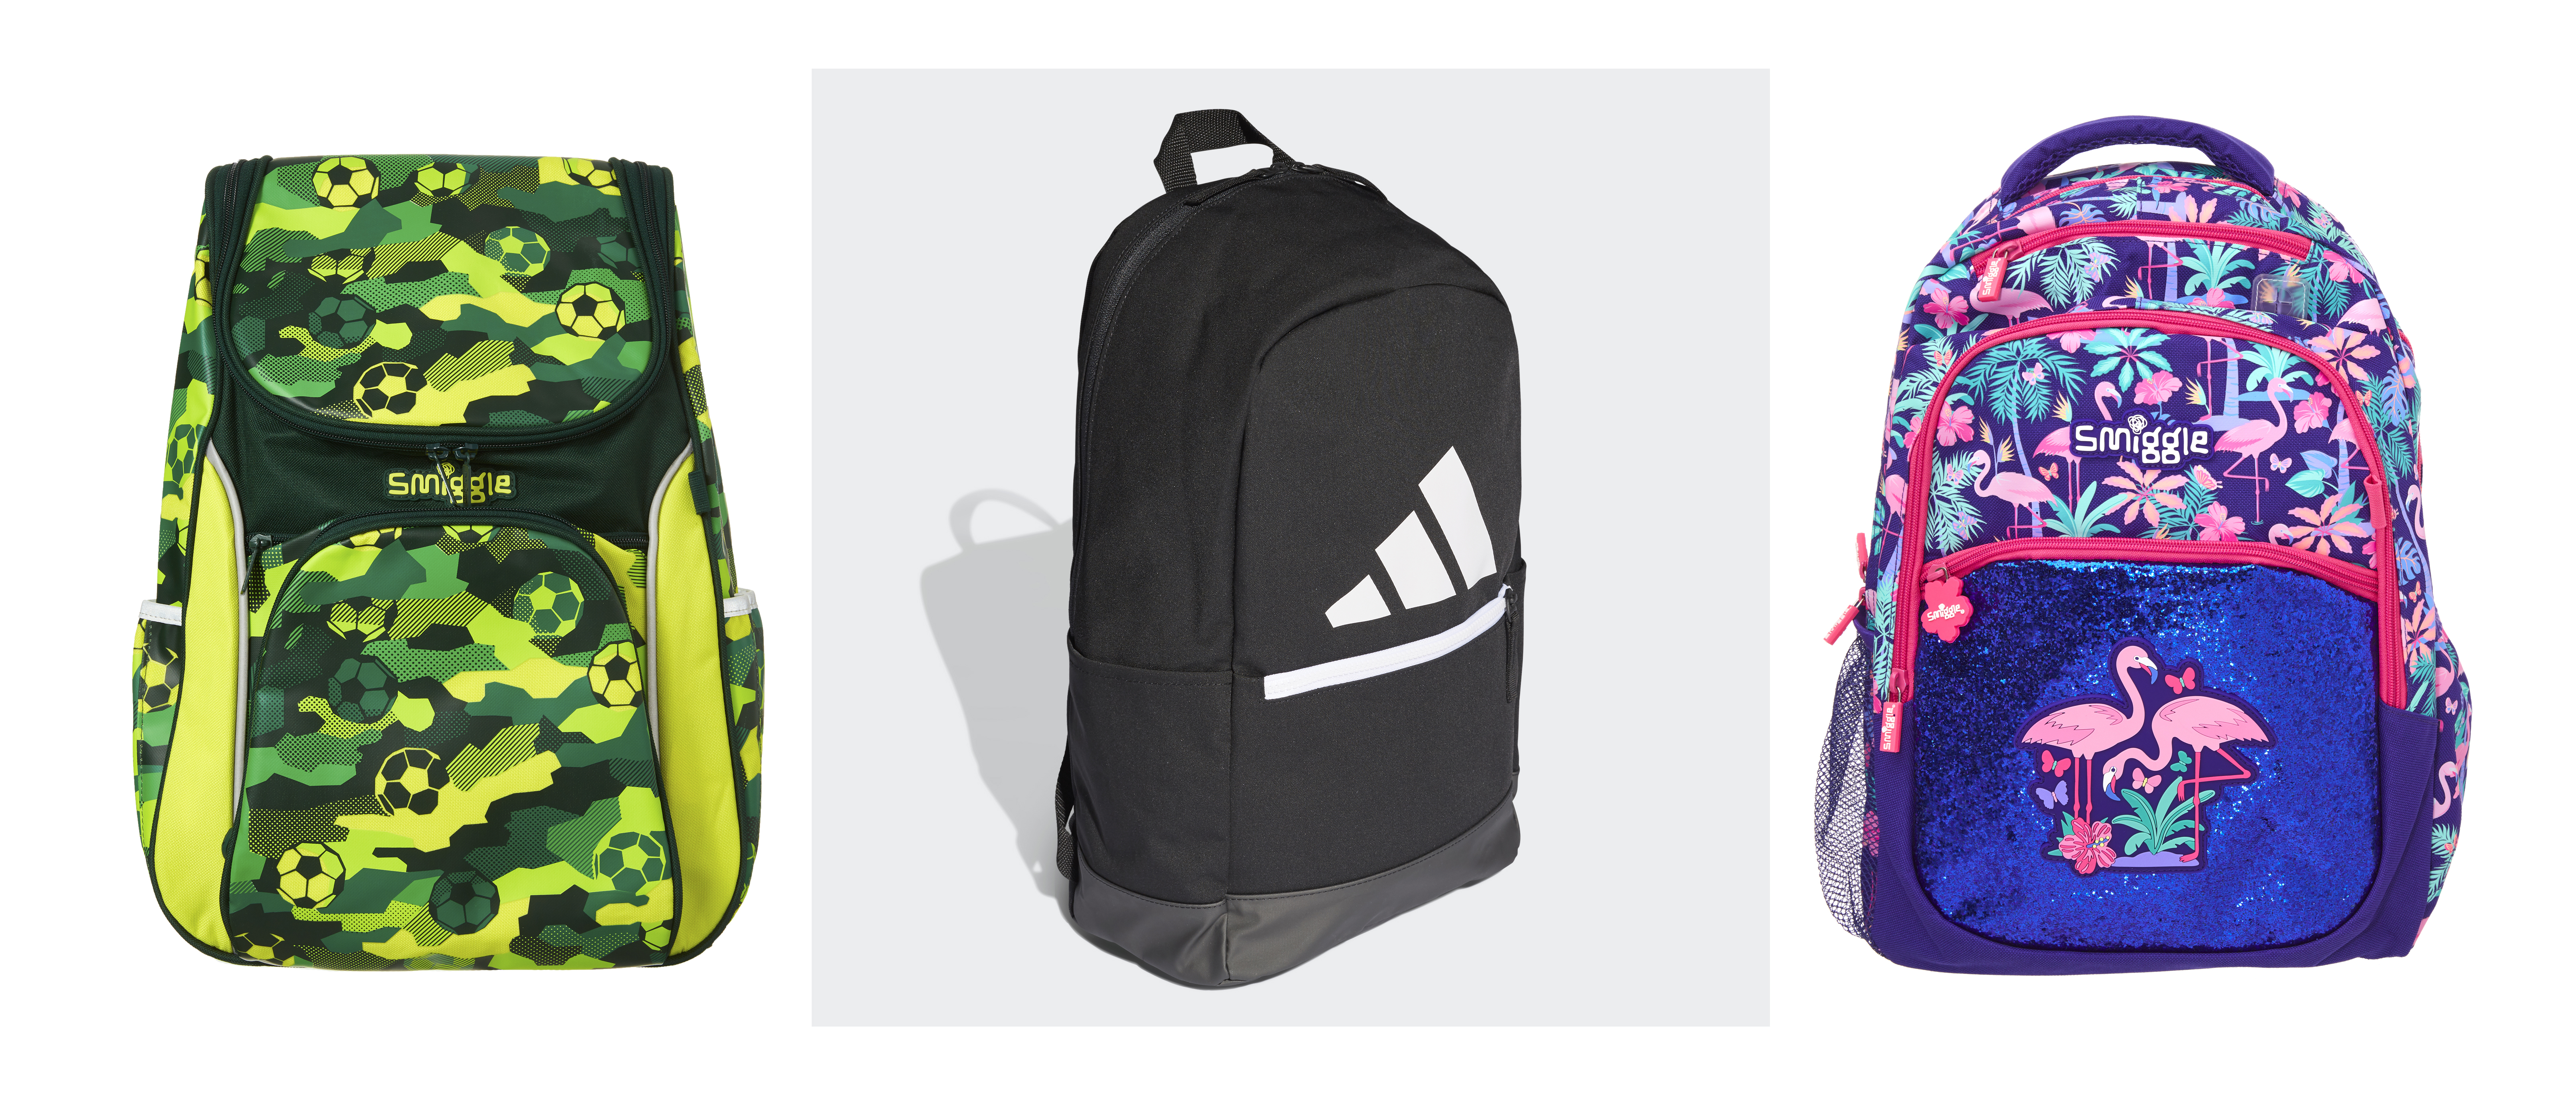 A selection of school bags from Smiggle and Adidas